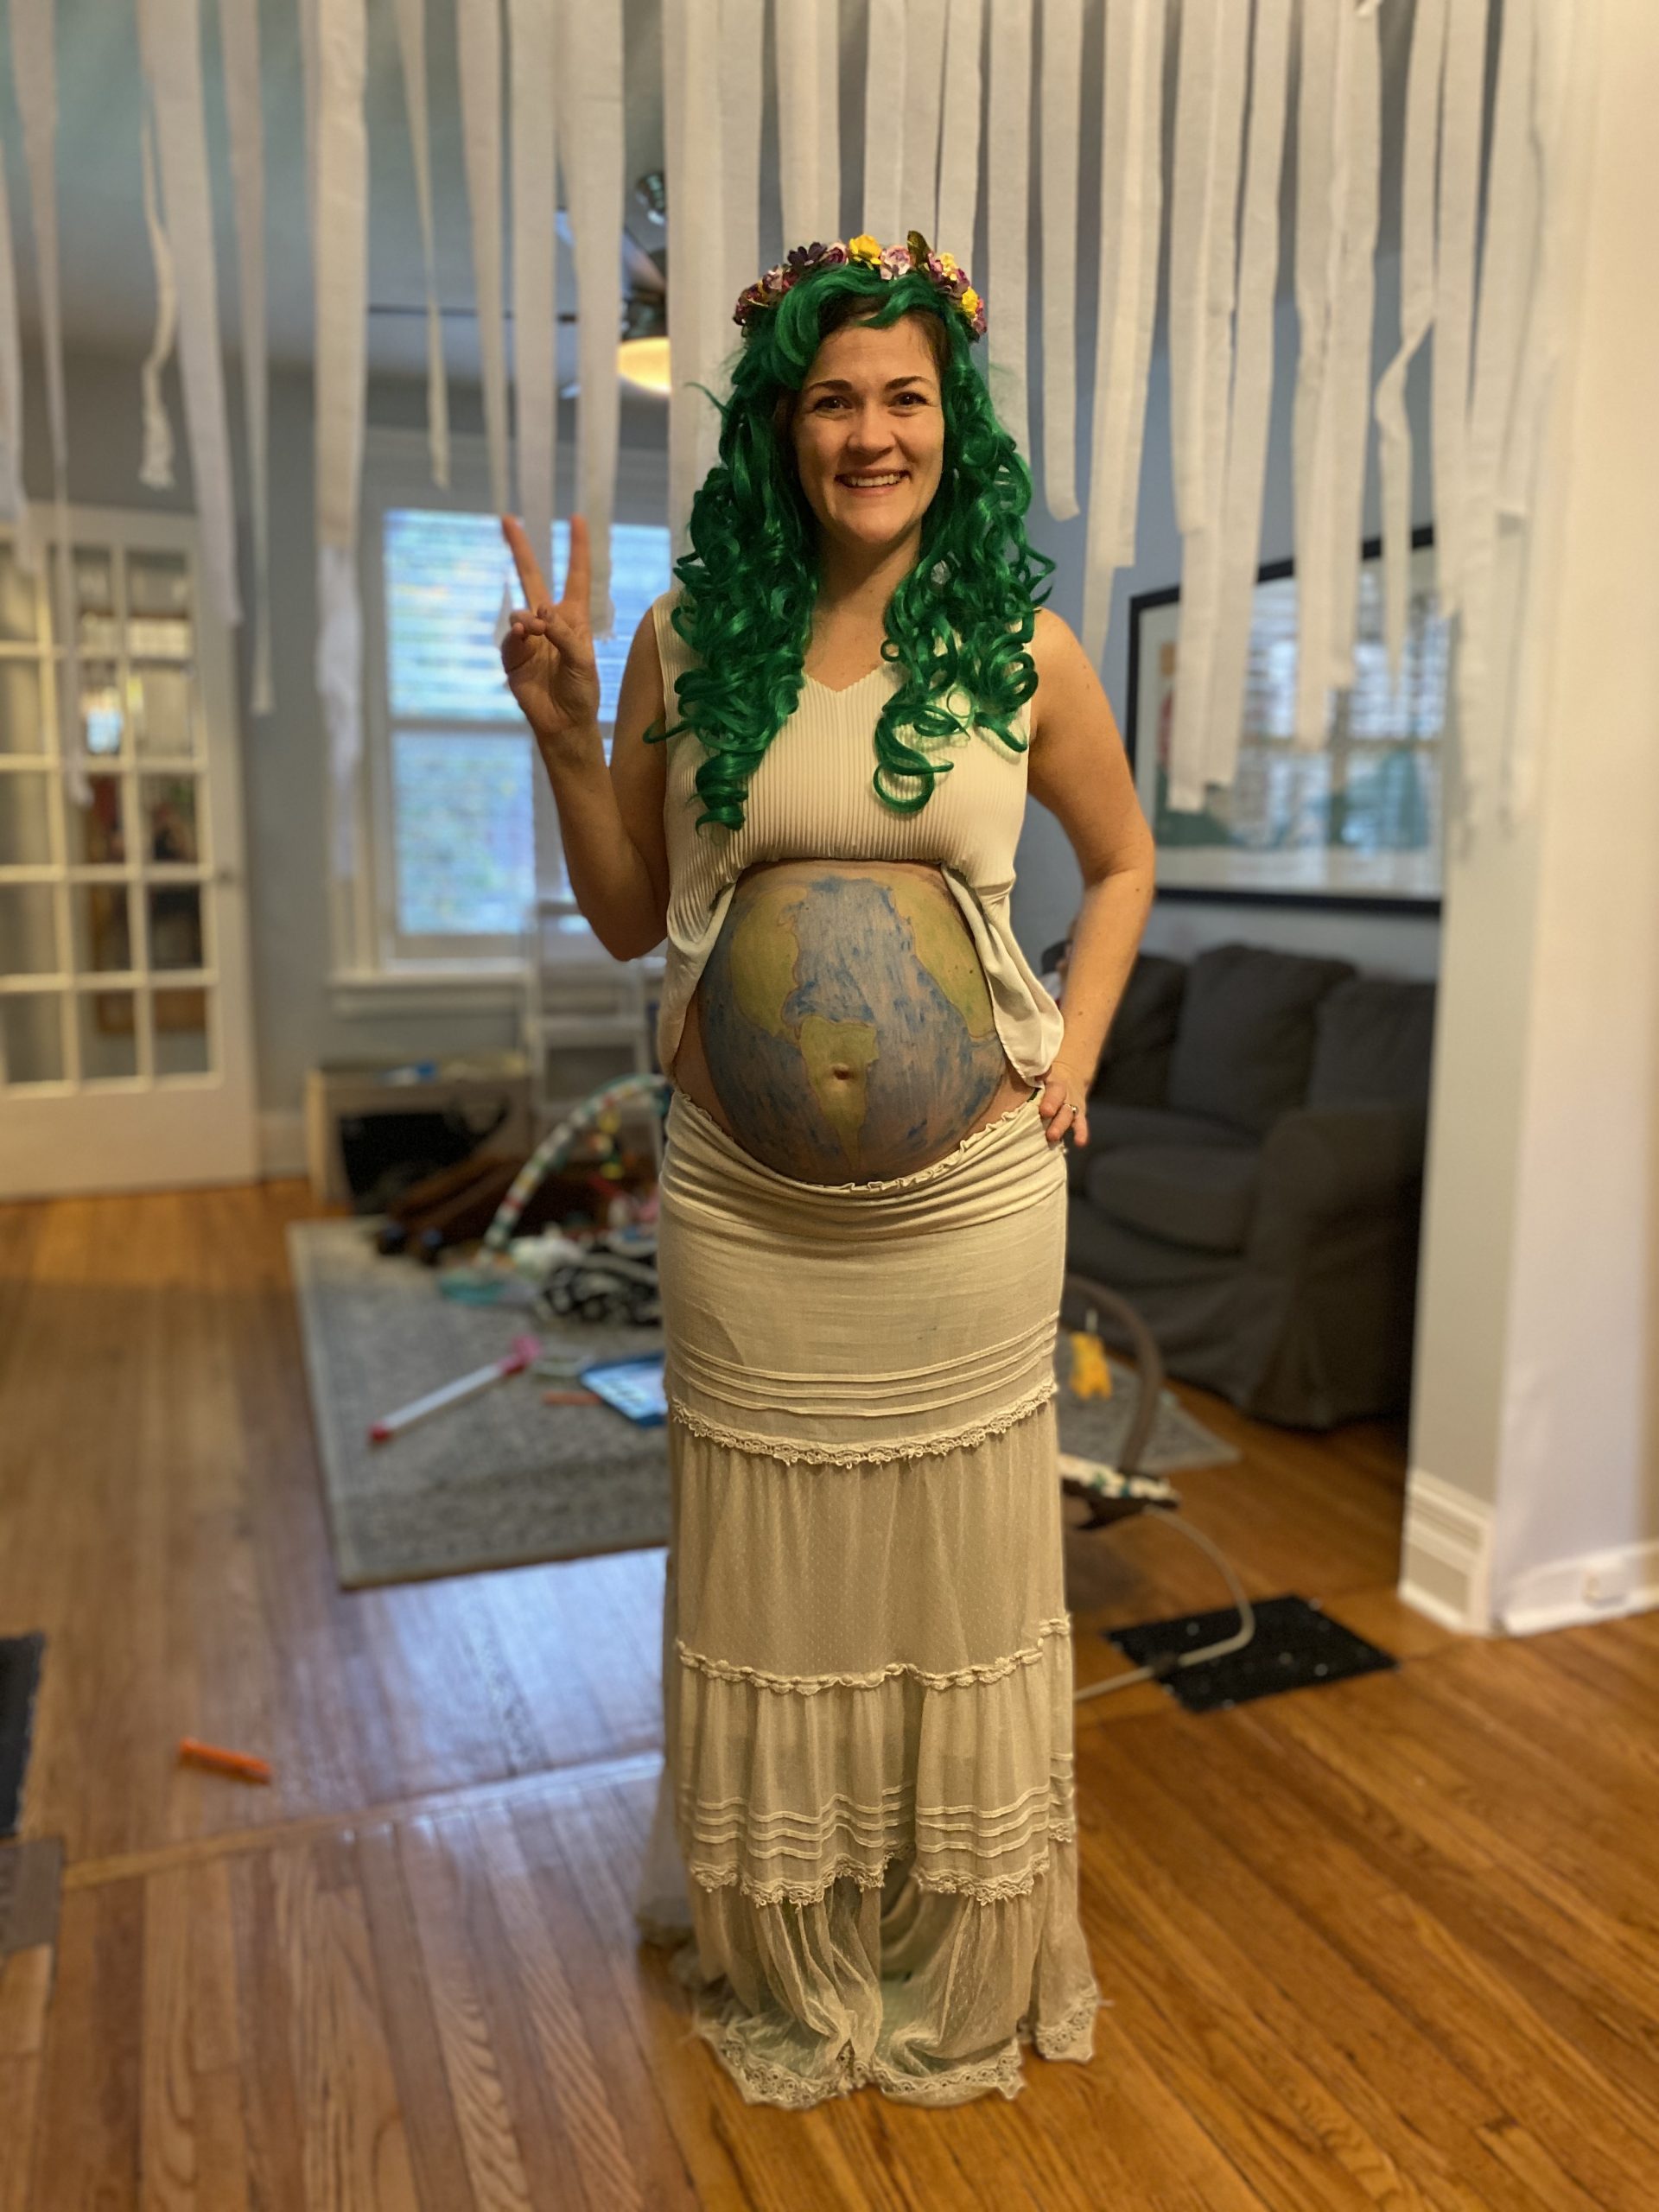 27 Pregnant Halloween Costumes for 2022: Creative Pregnancy Costumes